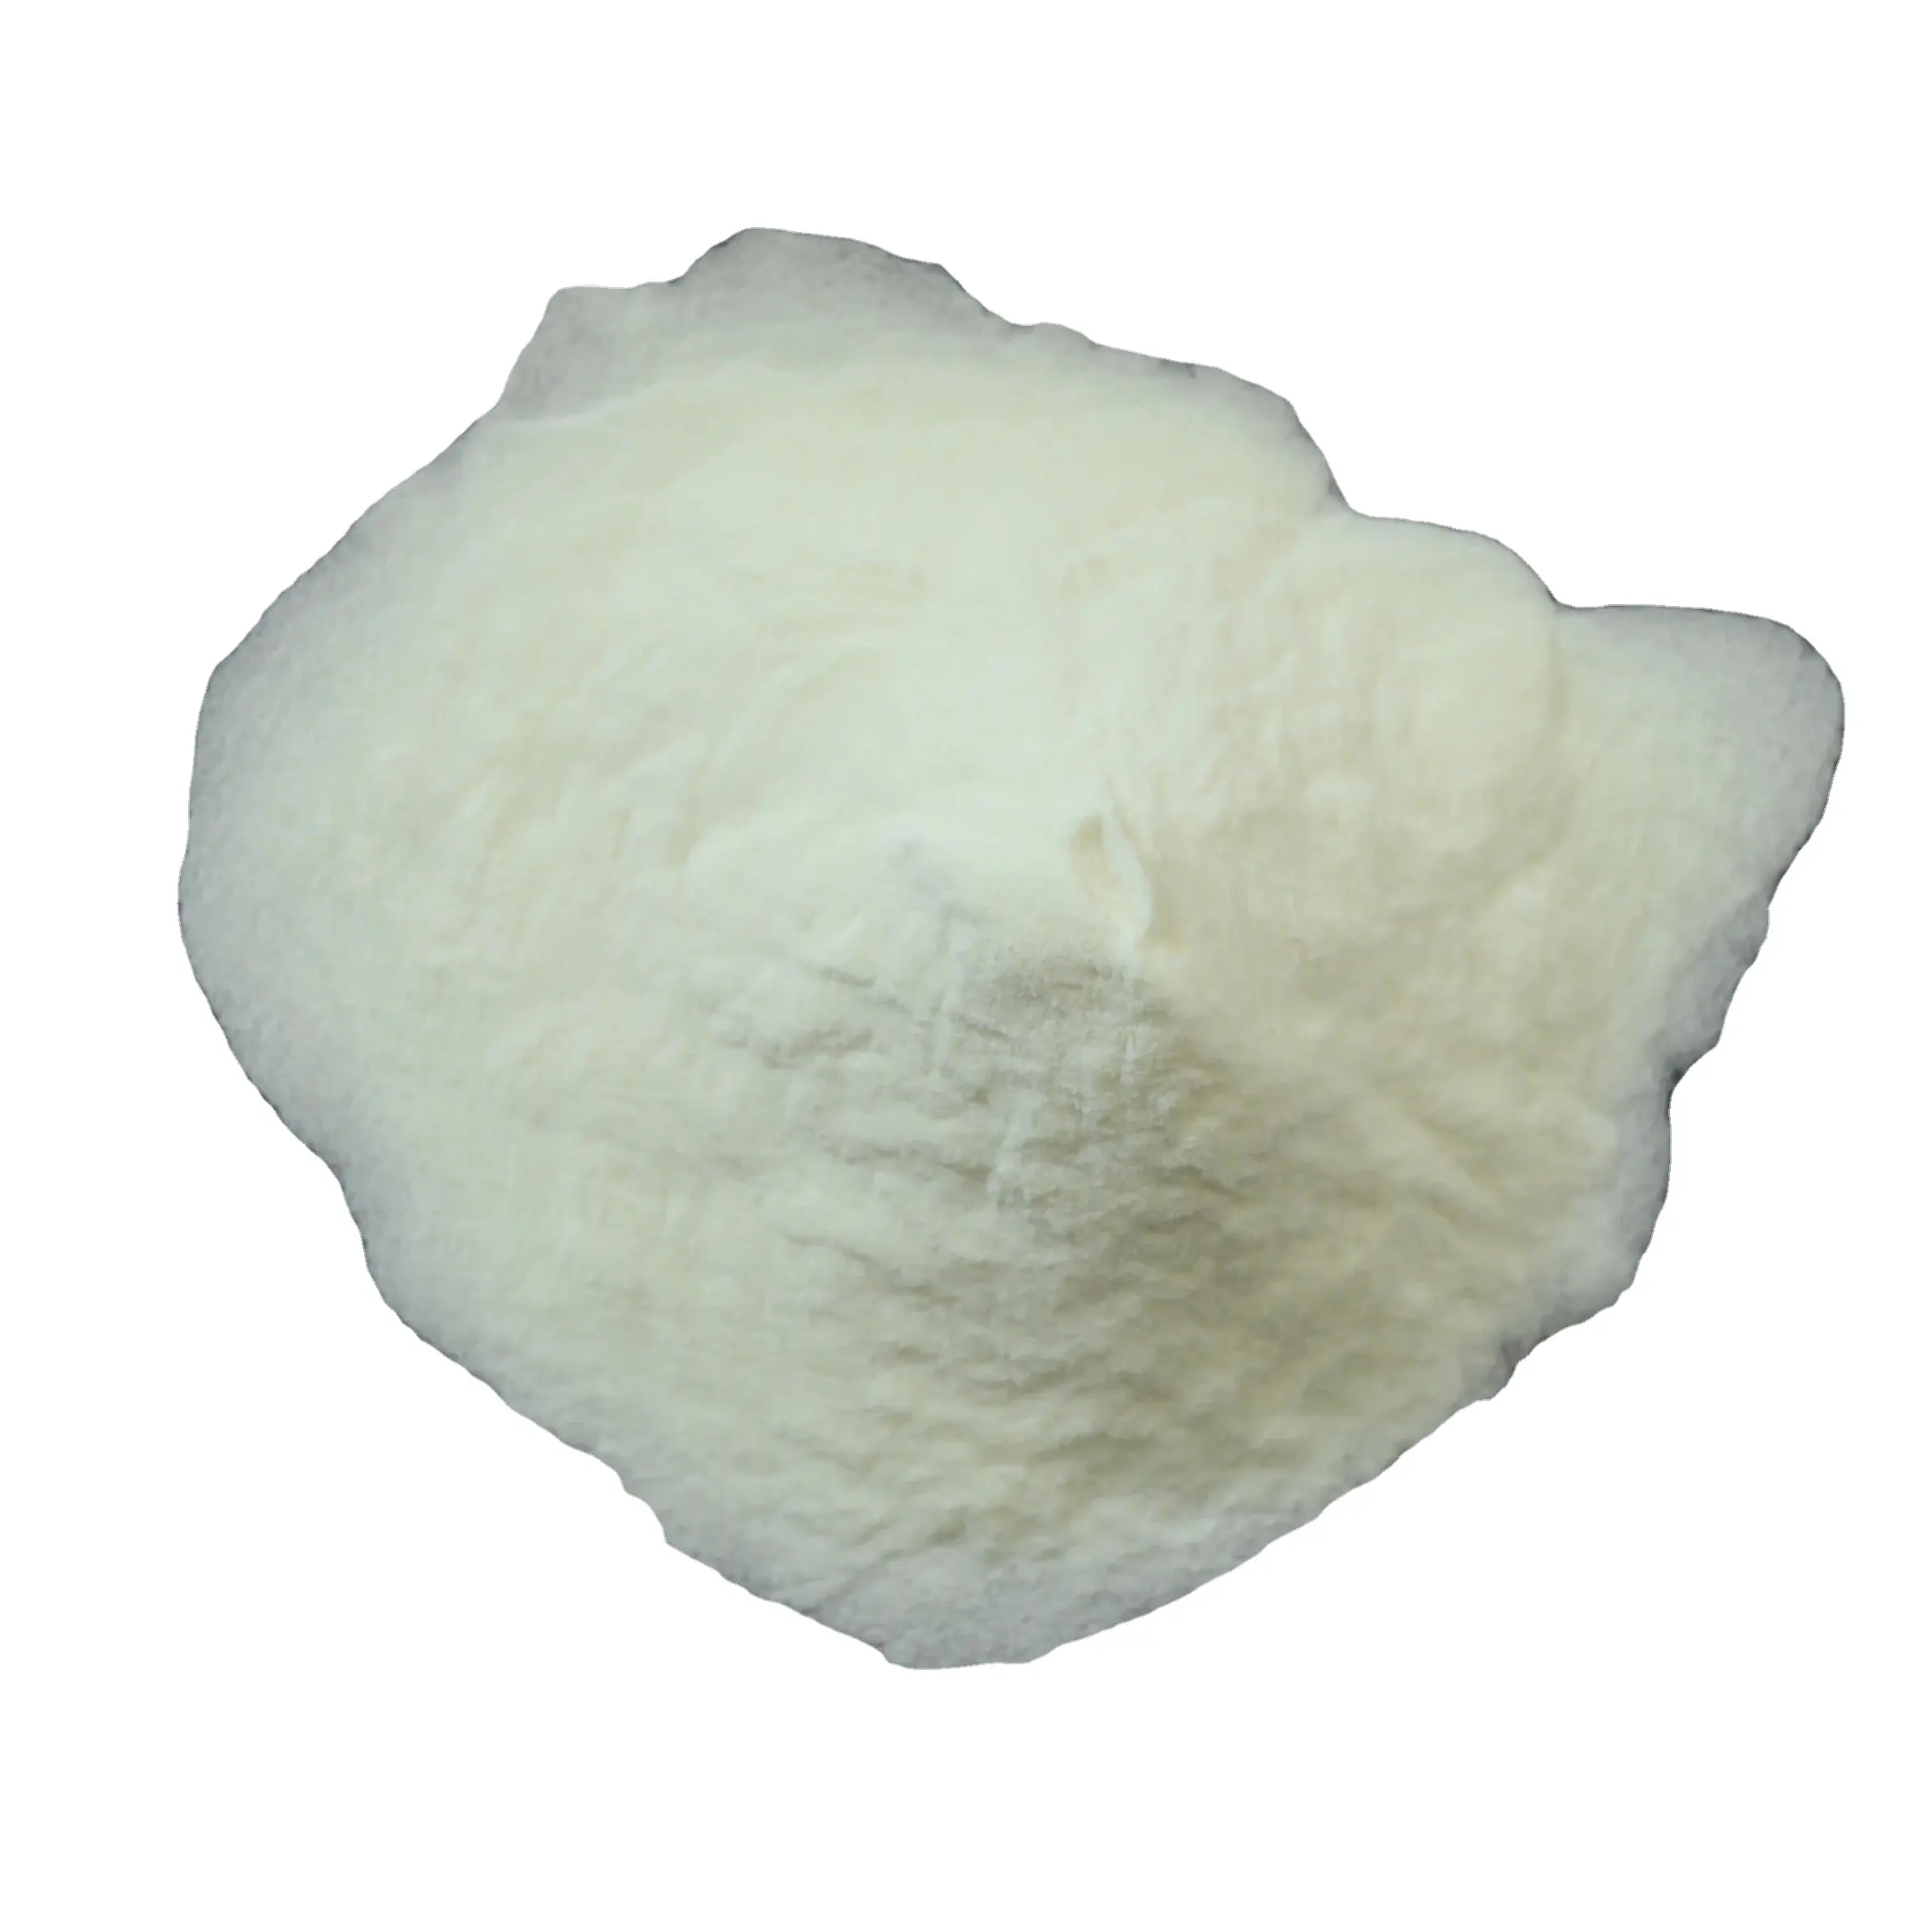 guar gum manufacturing plant produces guar gun powder in the filed of oil factruring and the guar gum powder price